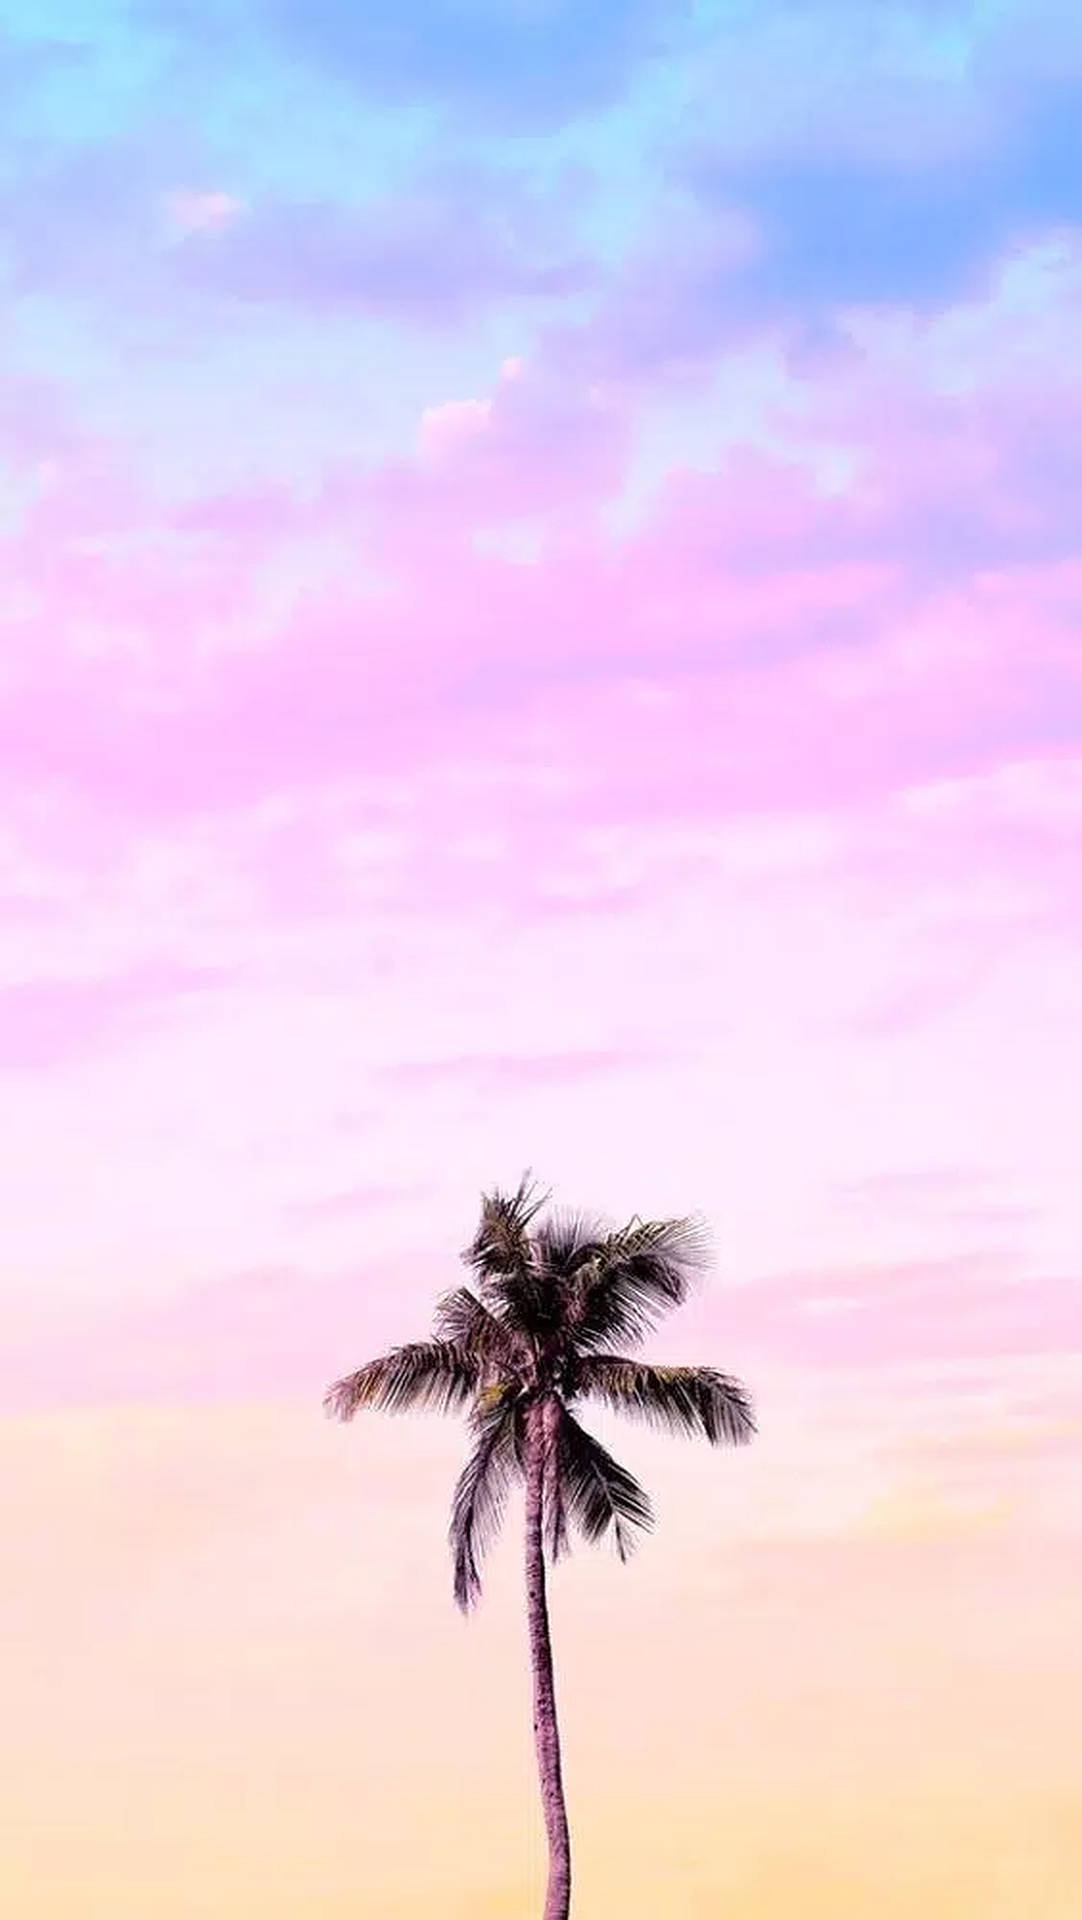 Sunset Palm Trees Art Print by NewburyBoutique  XSmall  Palm tree art Palm  trees wallpaper Palm trees painting